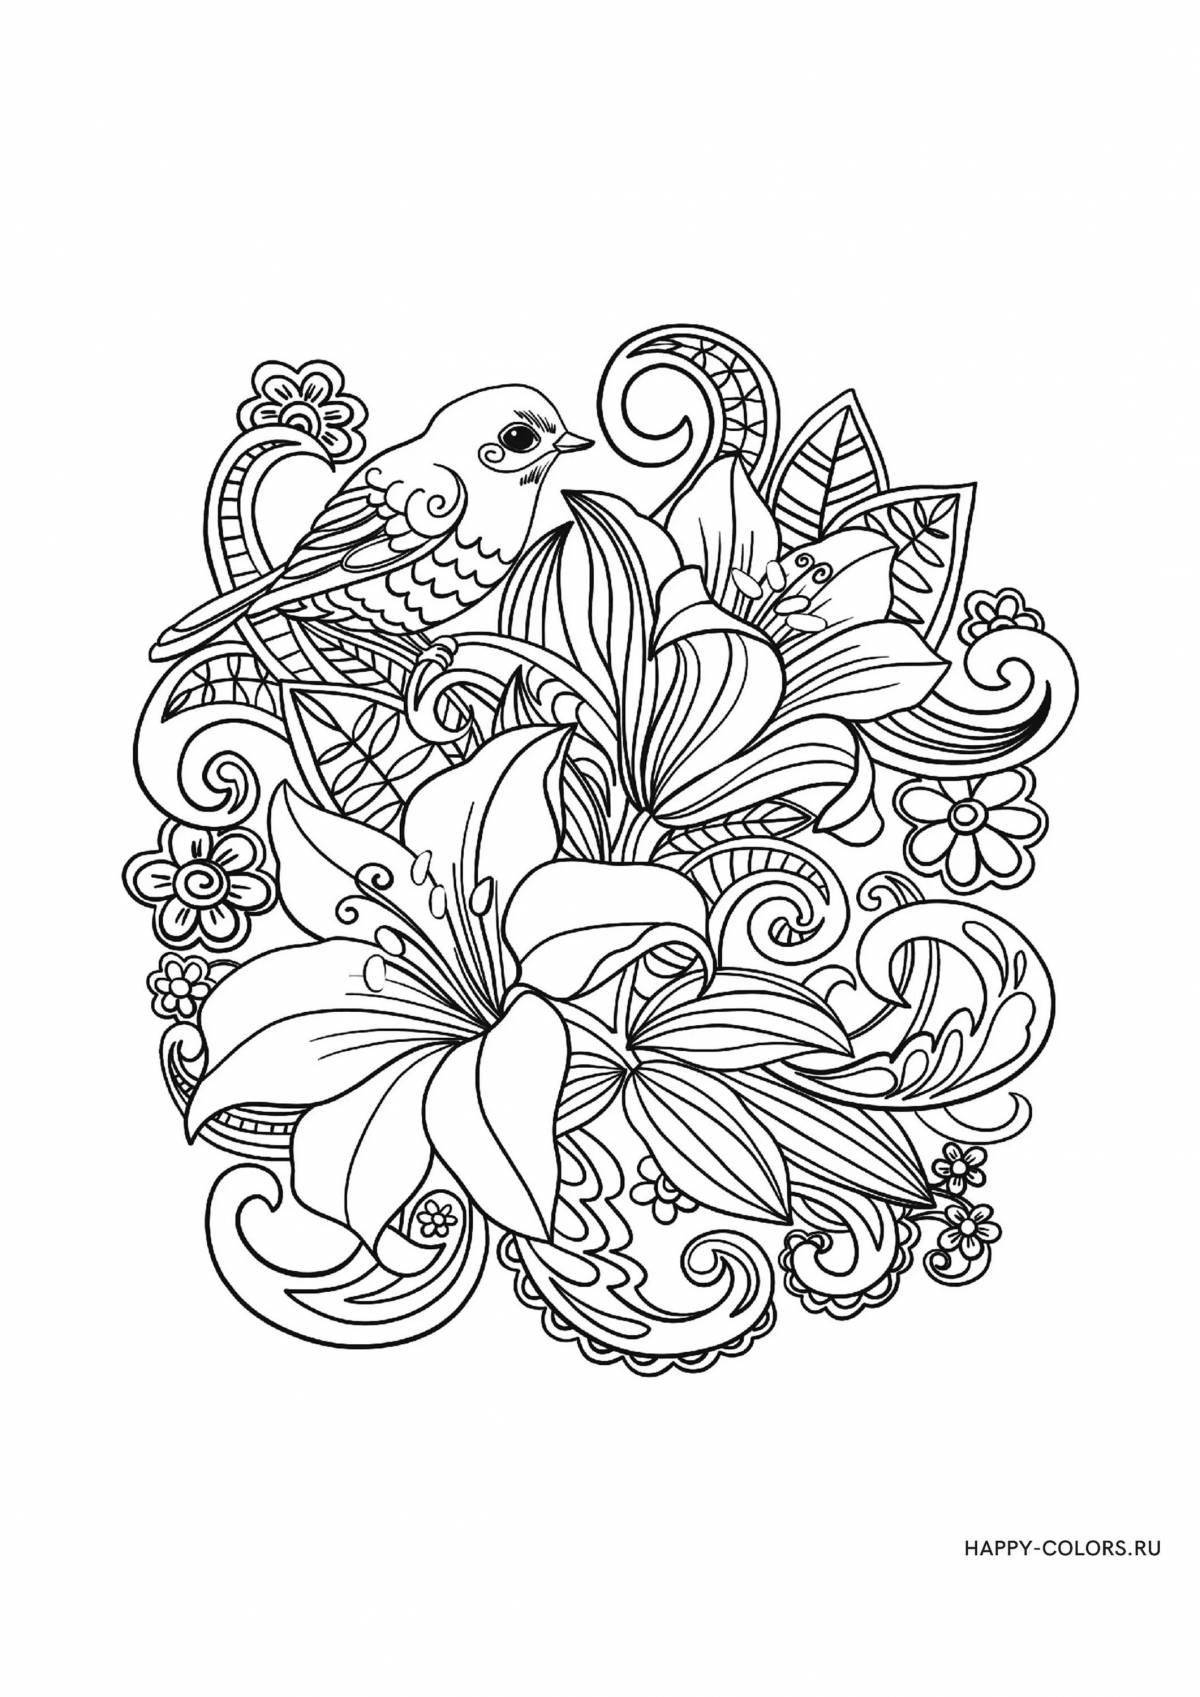 Bright 15 year anti-stress coloring book